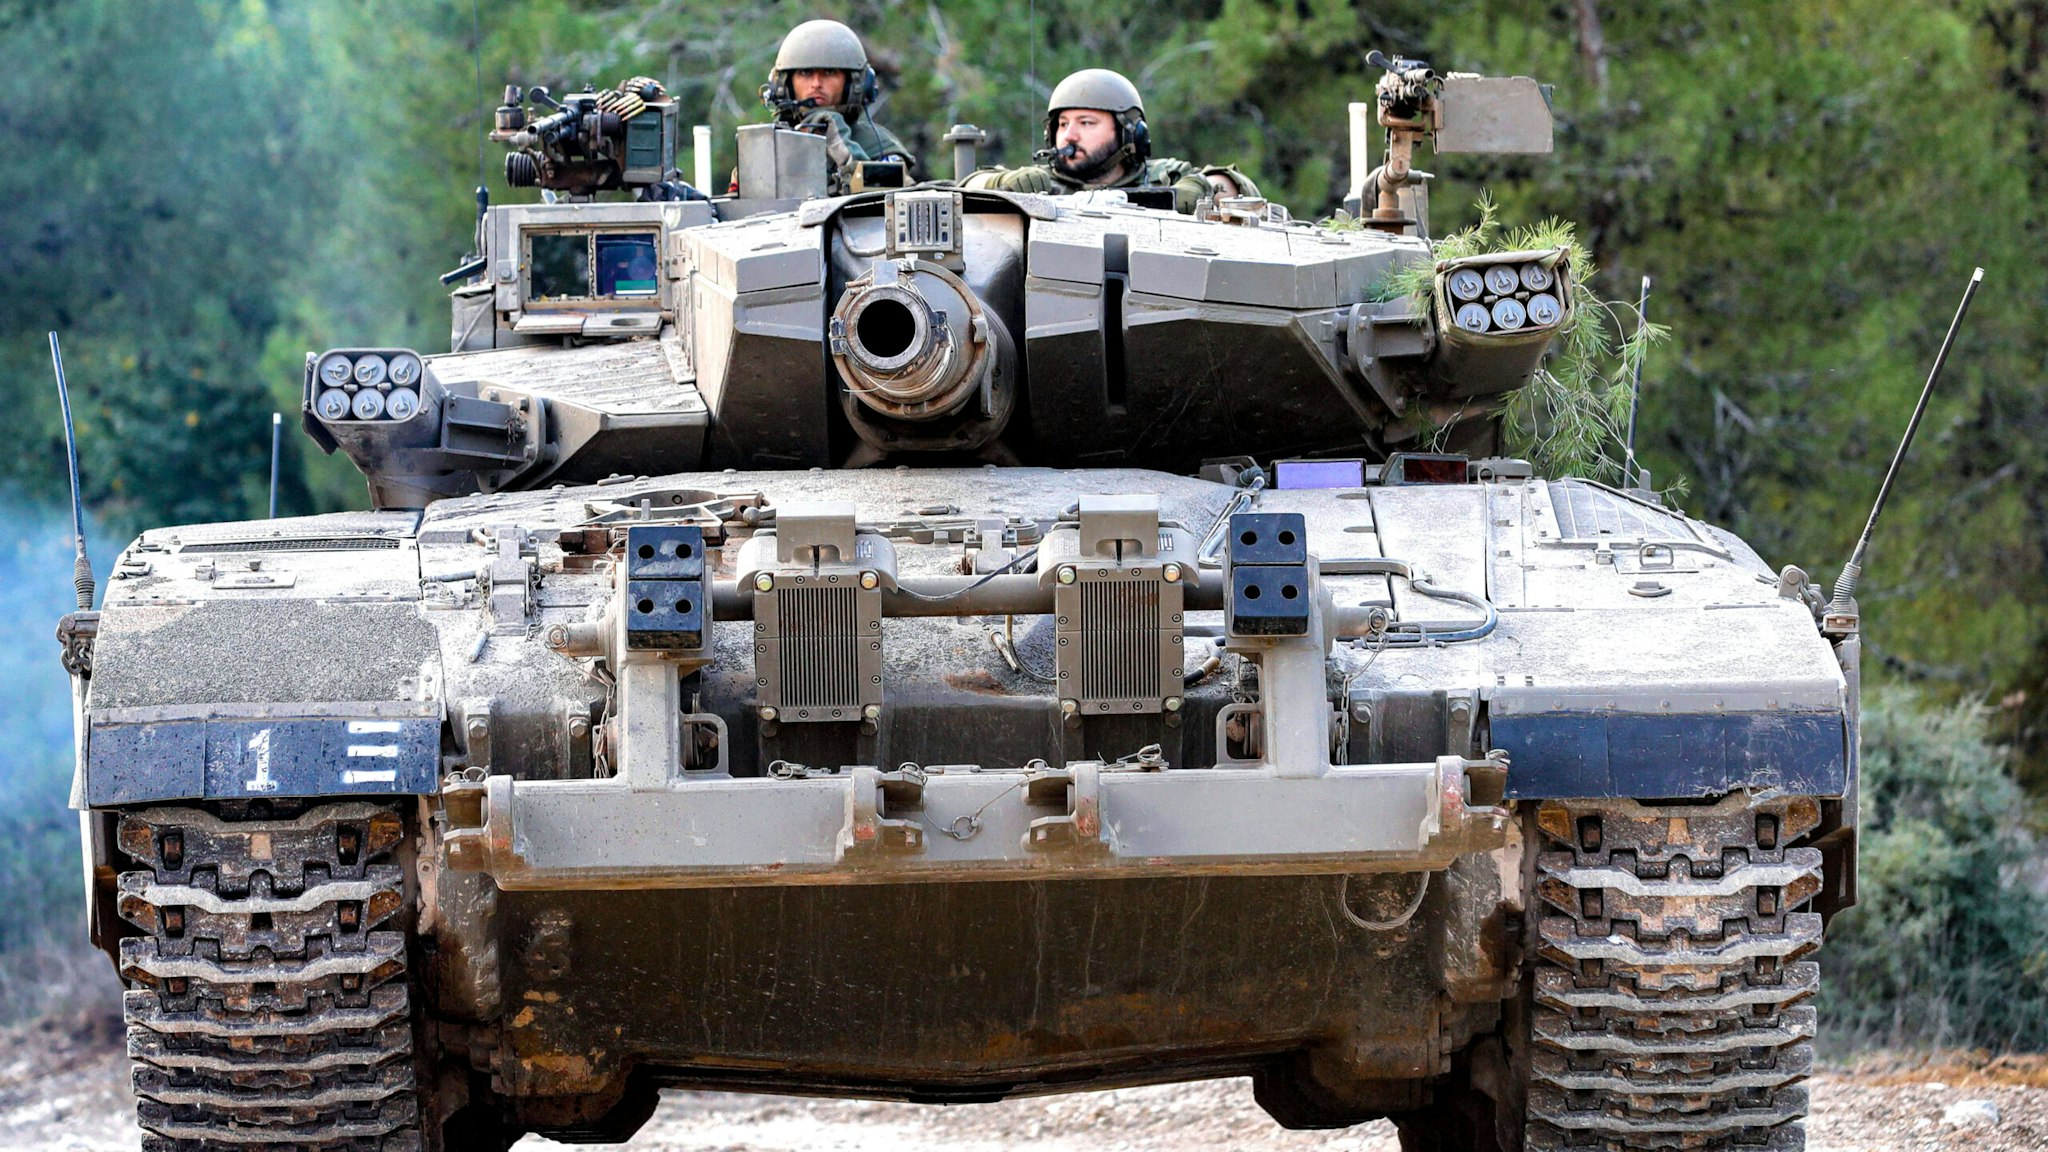 Israeli army soldiers sit in the turret of a battle tank moving at a position in the upper Galilee region of northern Israel near the border with Lebanon on November 1, 2023 amid increasing cross-border tensions between Hezbollah and Israel as fighting continues in the south with Hamas militants in the Gaza Strip.